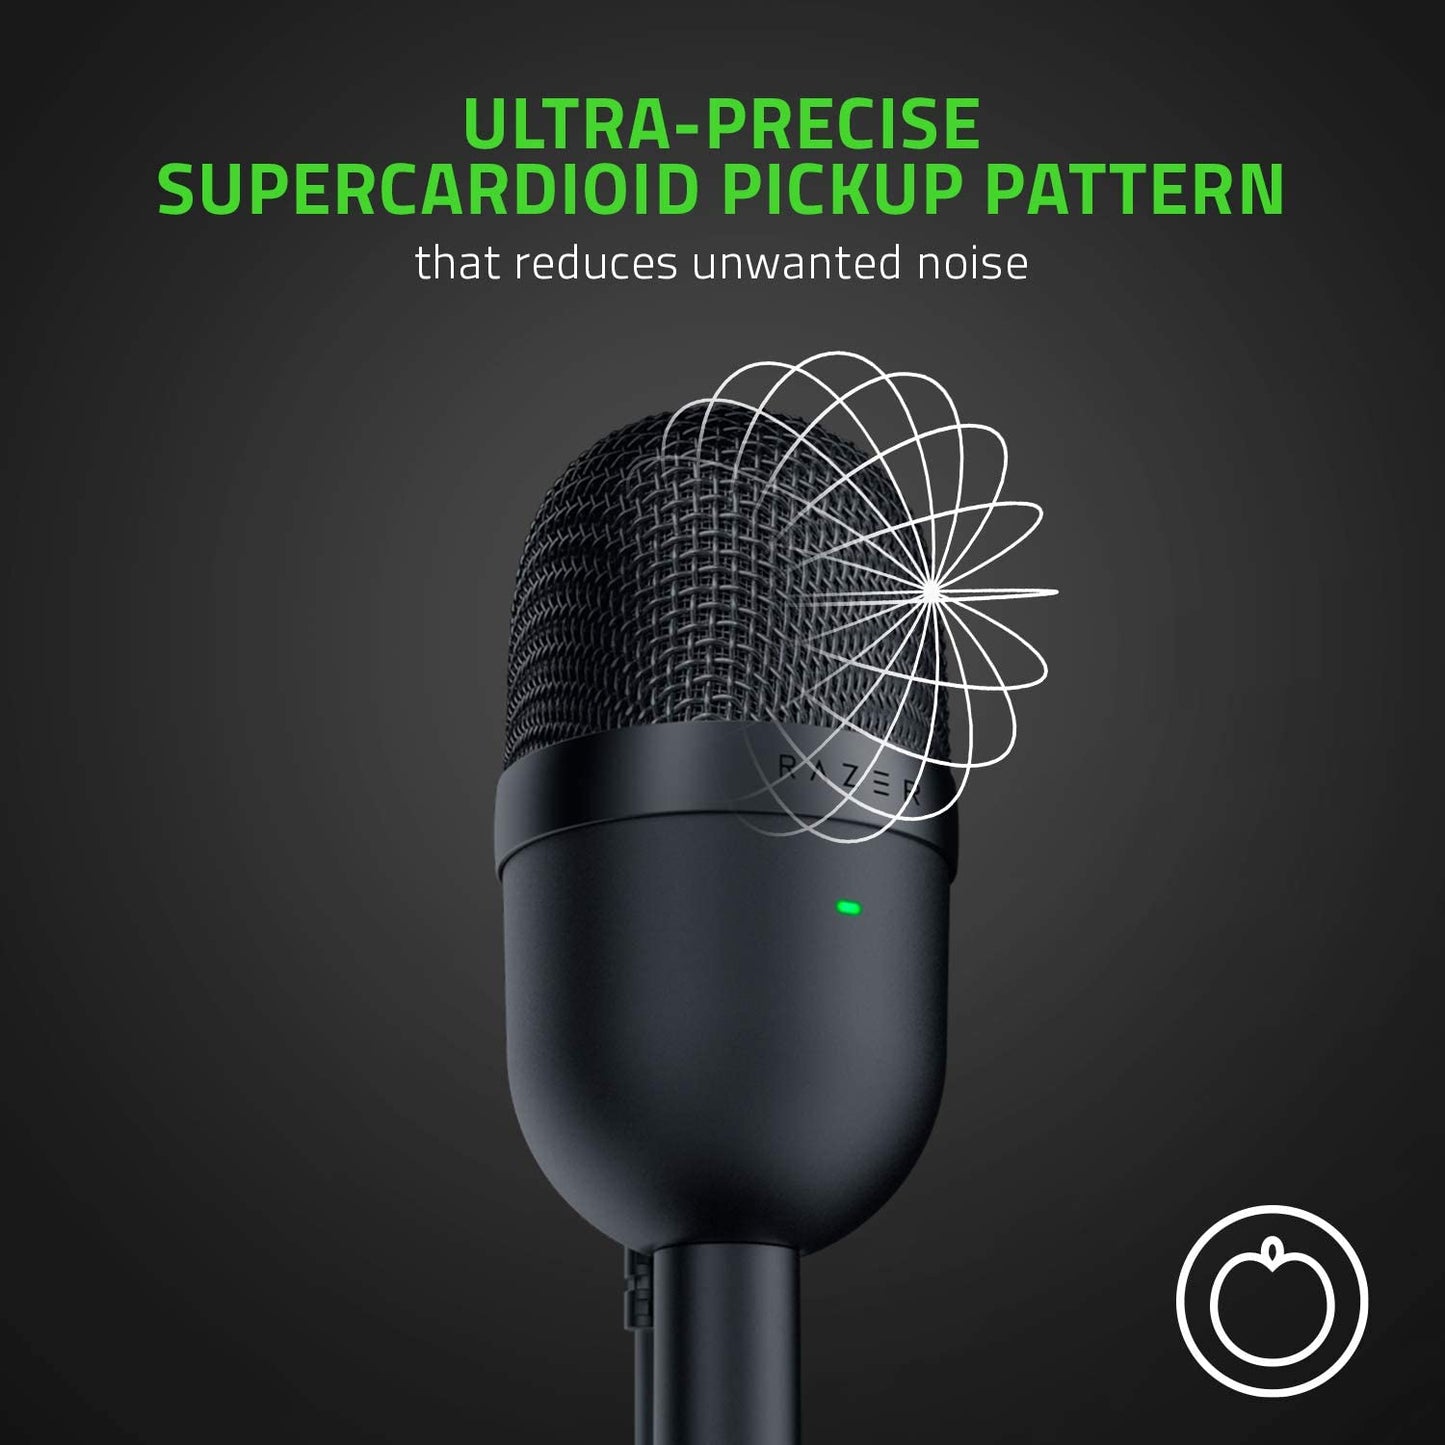 Seiren Mini USB Condenser Microphone: for Streaming and Gaming on PC - Professional Recording Quality - Precise Supercardioid Pickup Pattern - Tilting Stand - Shock Resistant - Classic Black